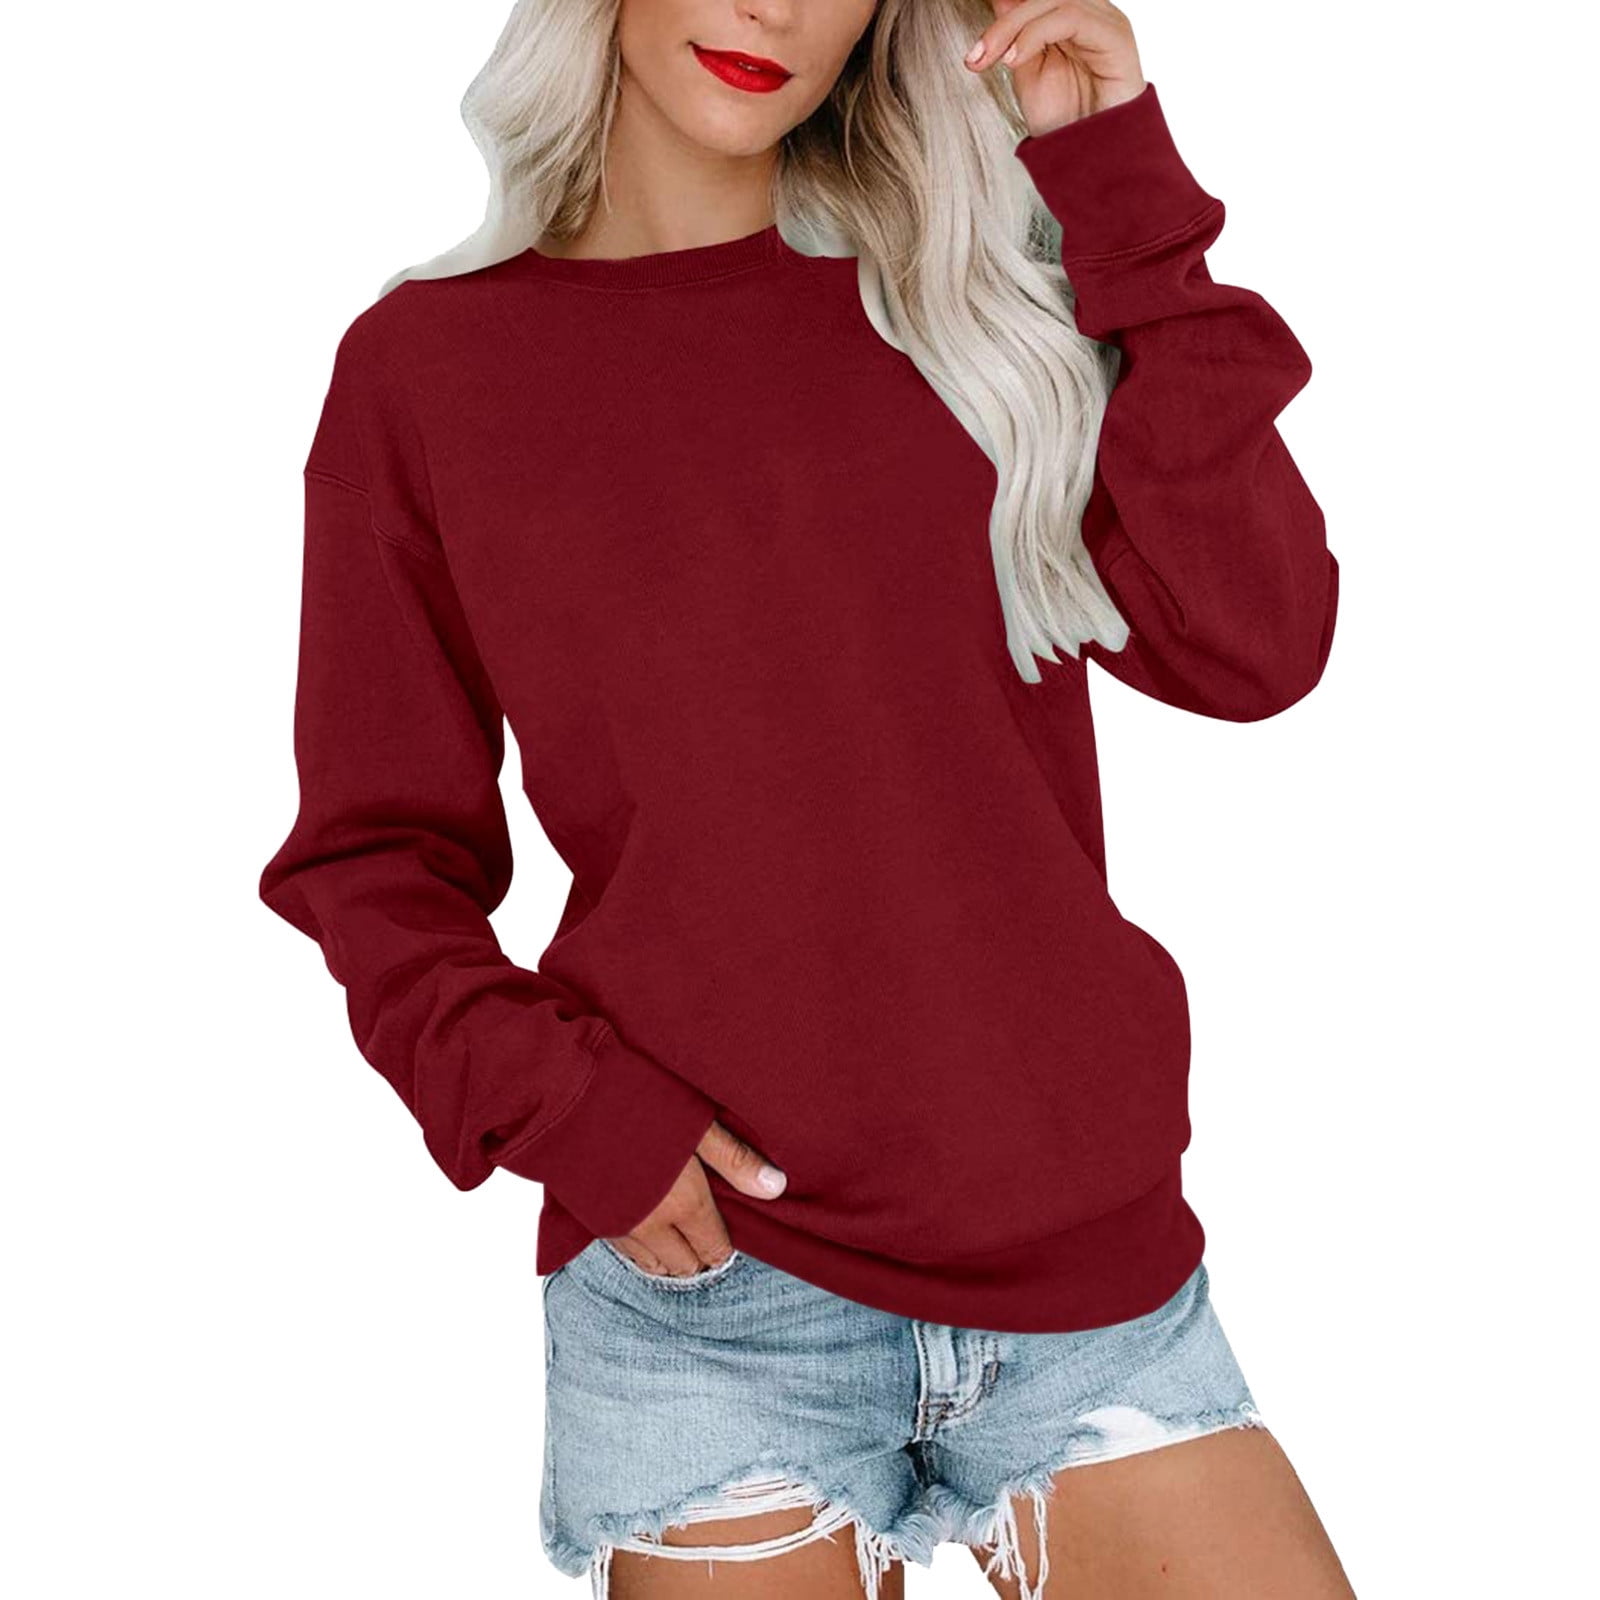 TXIAOLLY Women Tops Dressy,Womens Crew Neck Sweatshirts Tops Long Sleeve  Casual Pullover Cute Lightweight Loose Tops